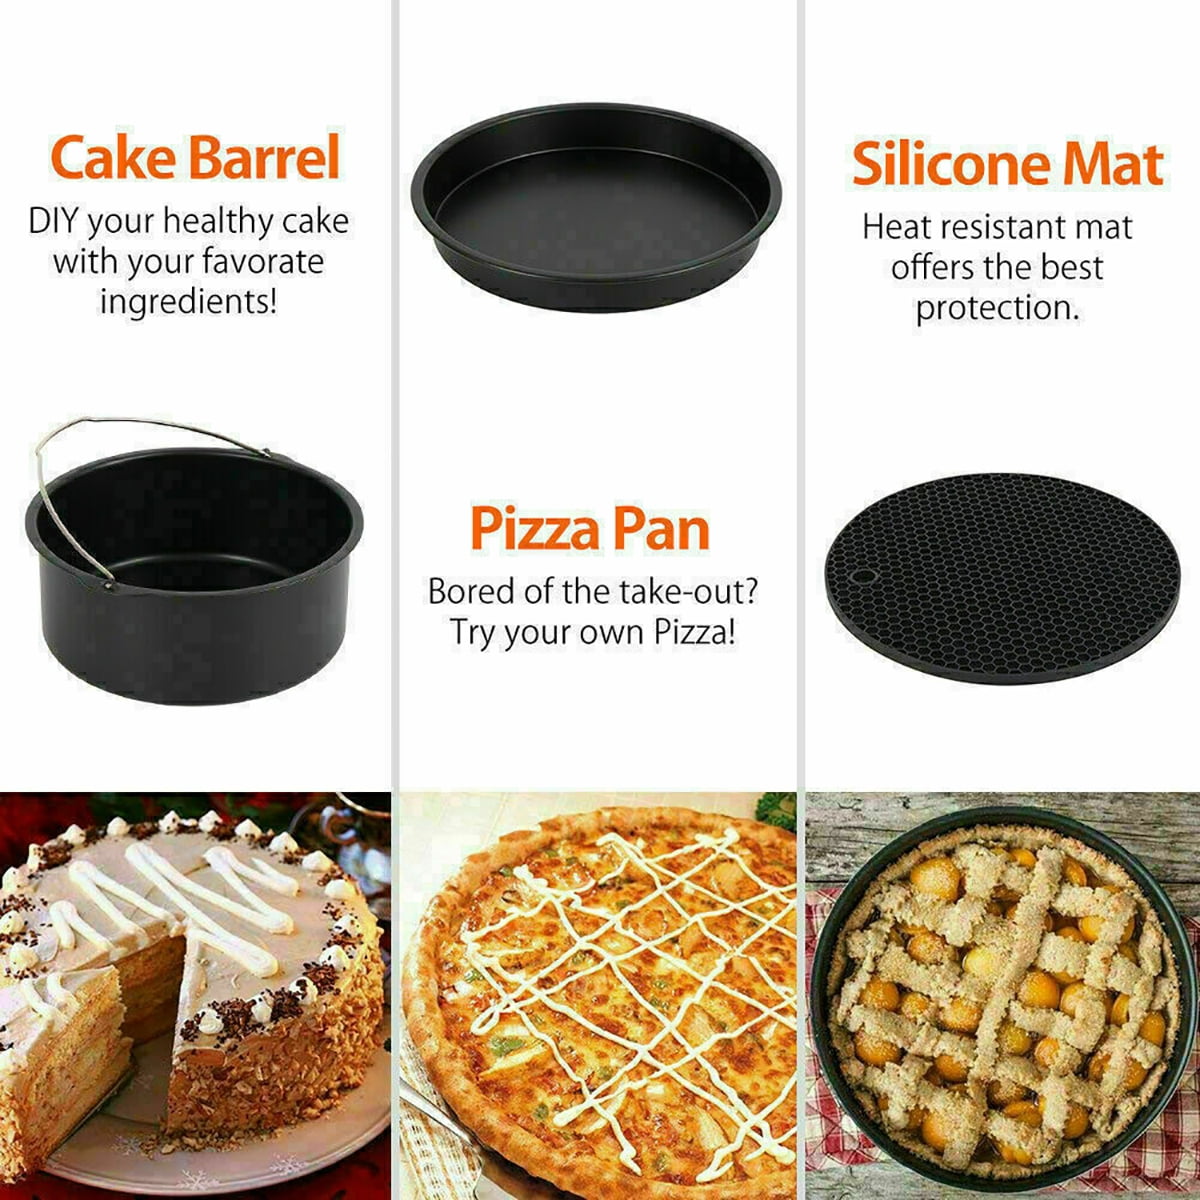 AIQI 5 Piece Air Fryer Accessories, Including Cake Barrel, Pizza